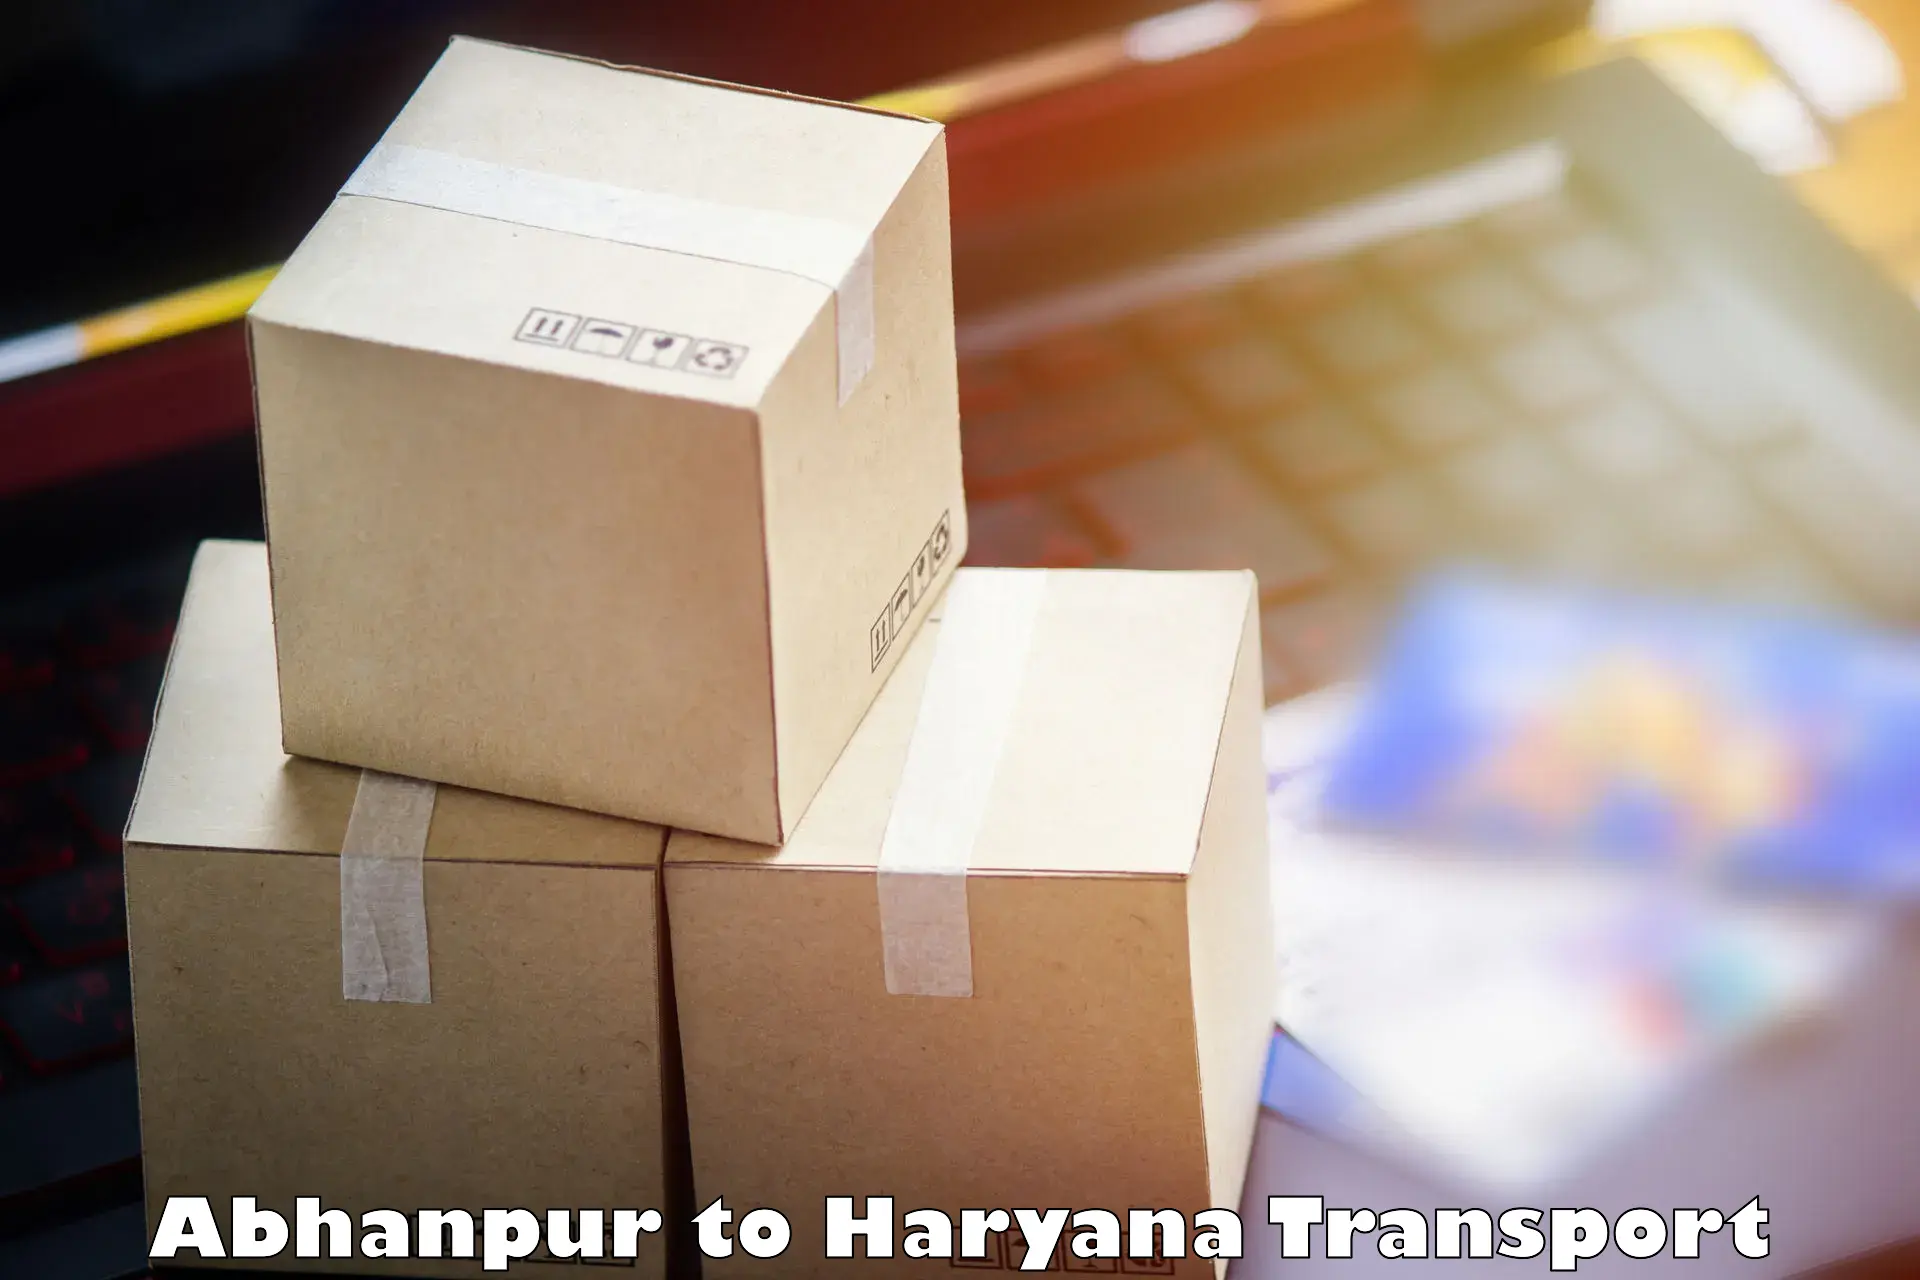 Air freight transport services Abhanpur to Chaudhary Charan Singh Haryana Agricultural University Hisar